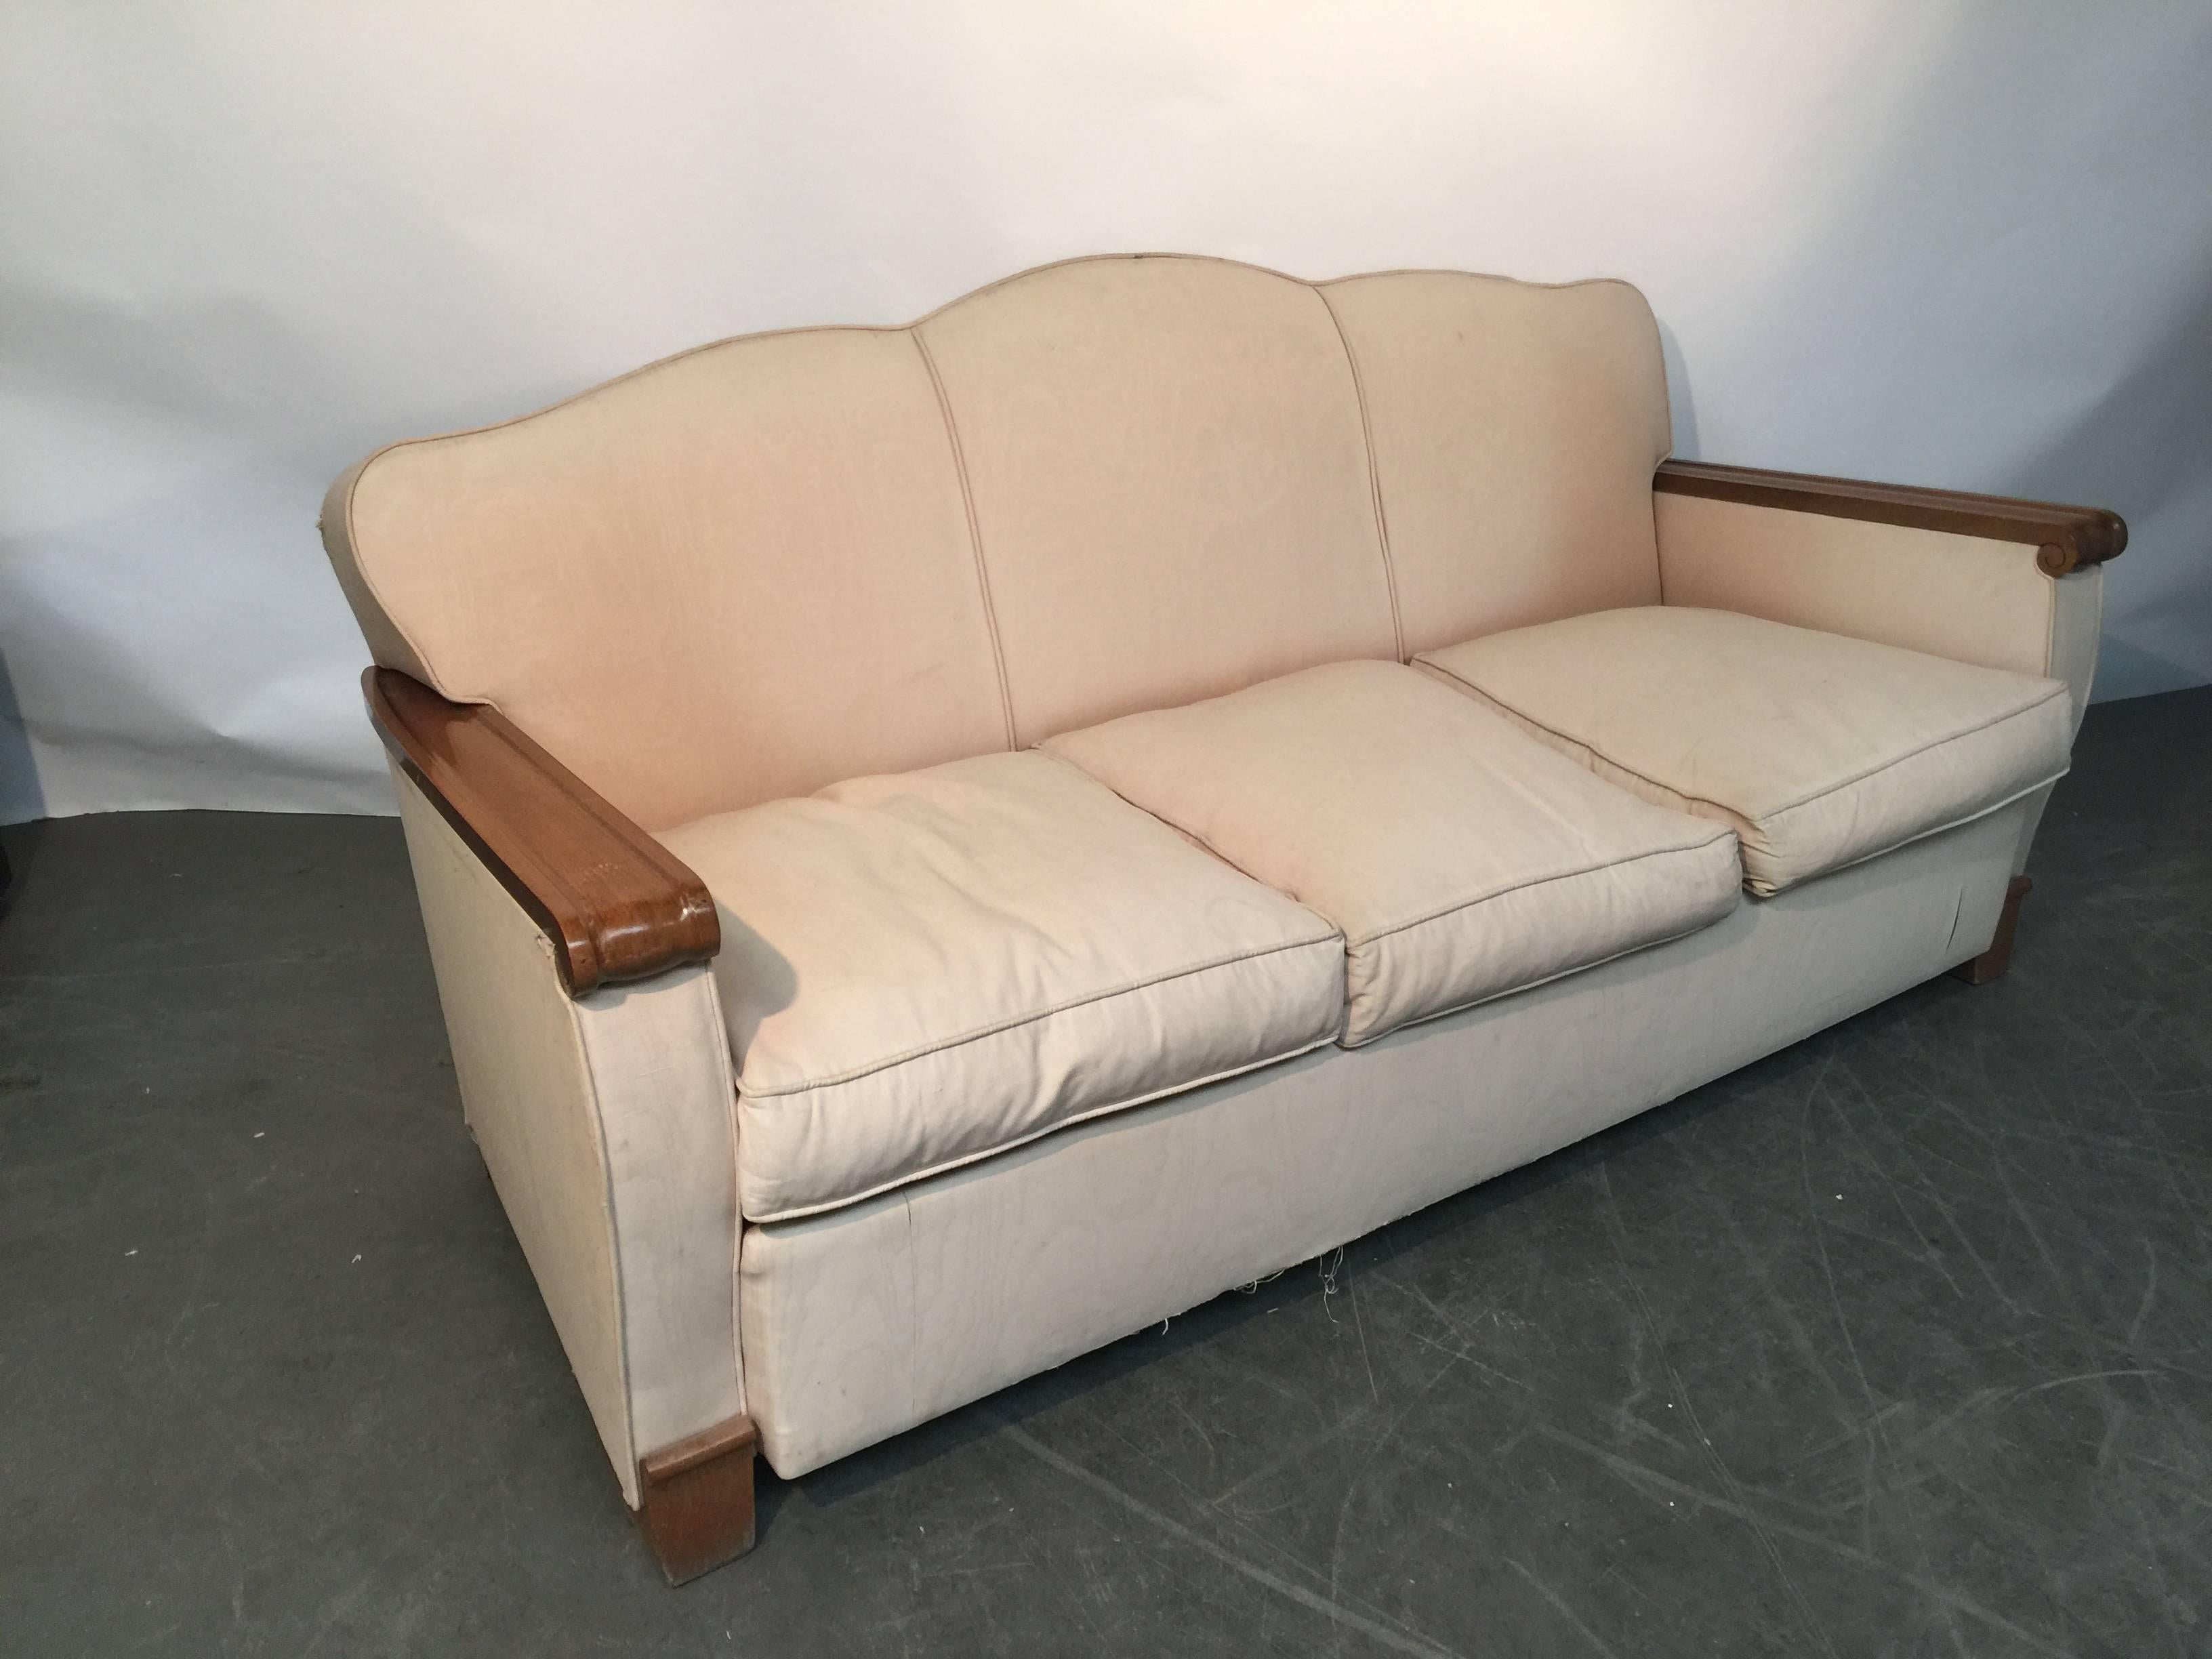 Gaston Poisson, Art Deco blond mahogany sofa.
Need new reupholstery.
A pair of armchair on the same model also available.
Four others armchairs on the same model but in deep mahogany also available.